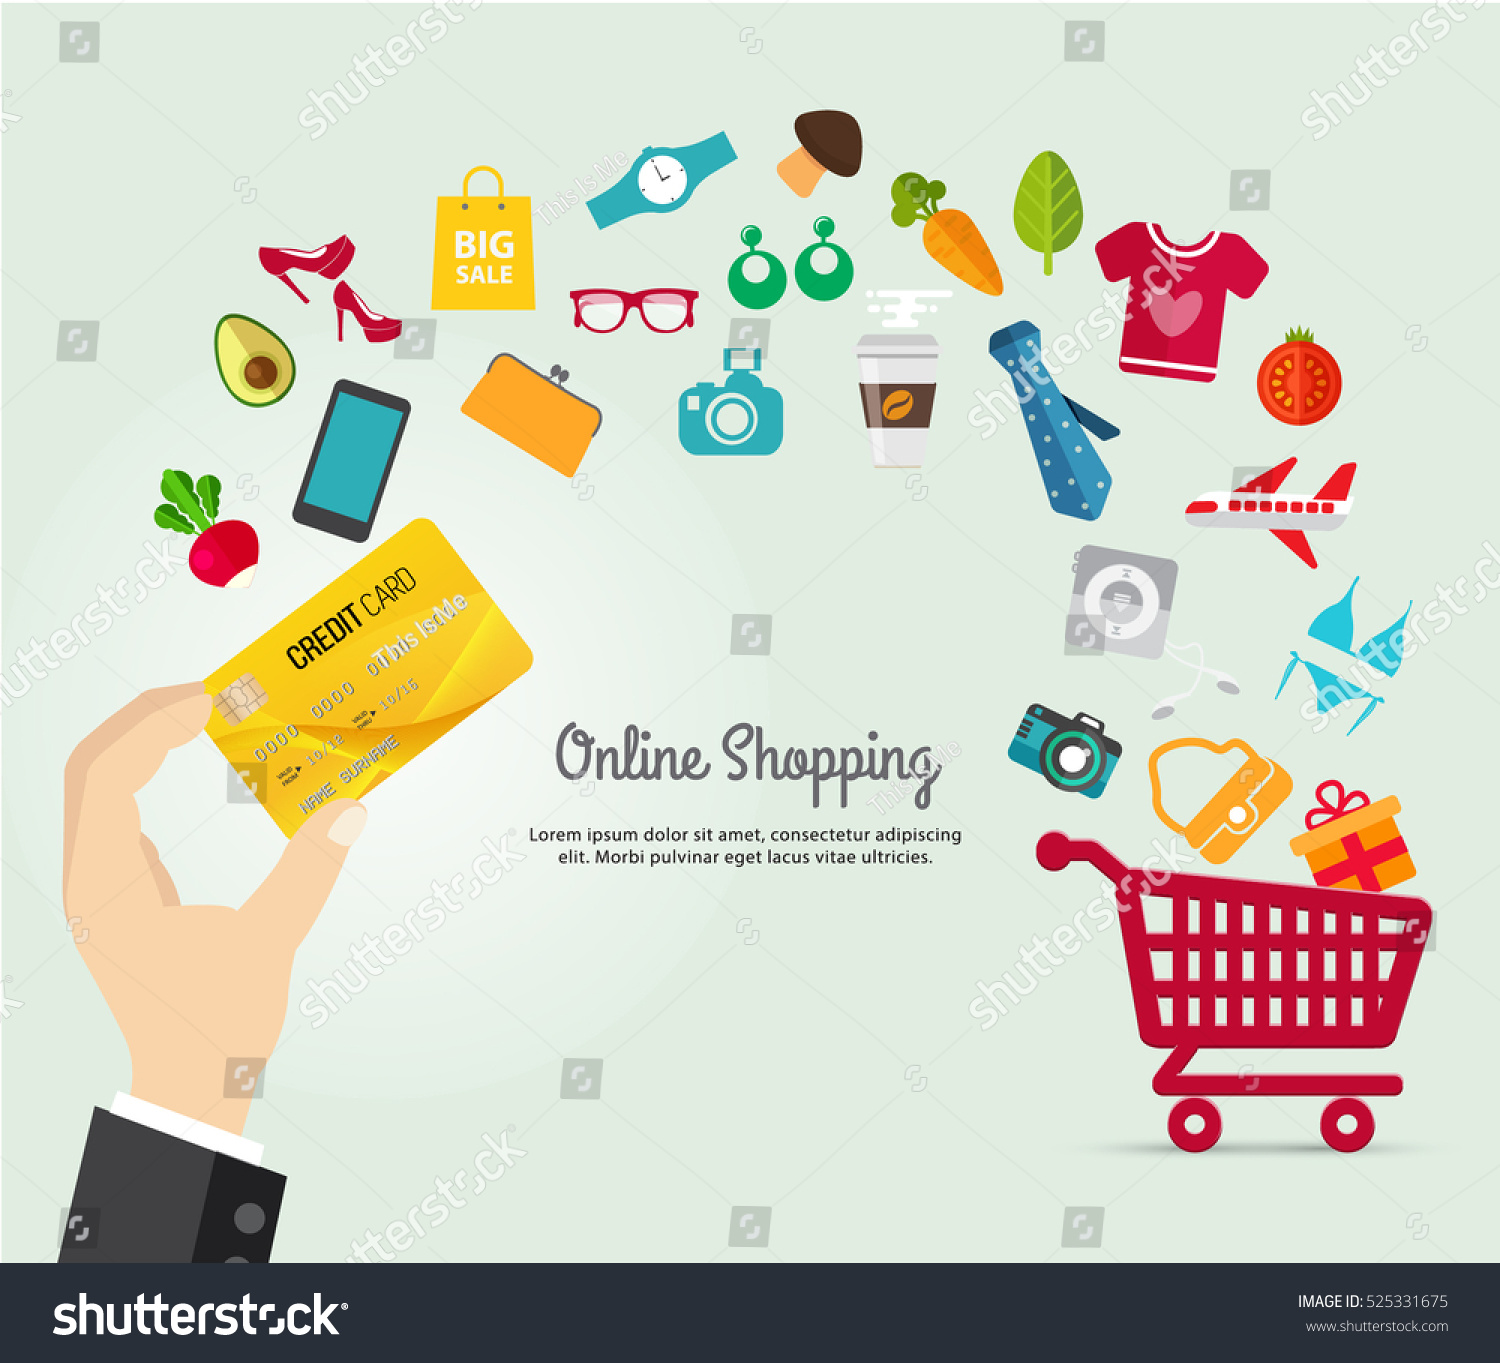 stock-vector-online-shopping-e-commerce-concept-business-order-item-store-online-on-smartphone-tablet-and-pay-525331675.jpg